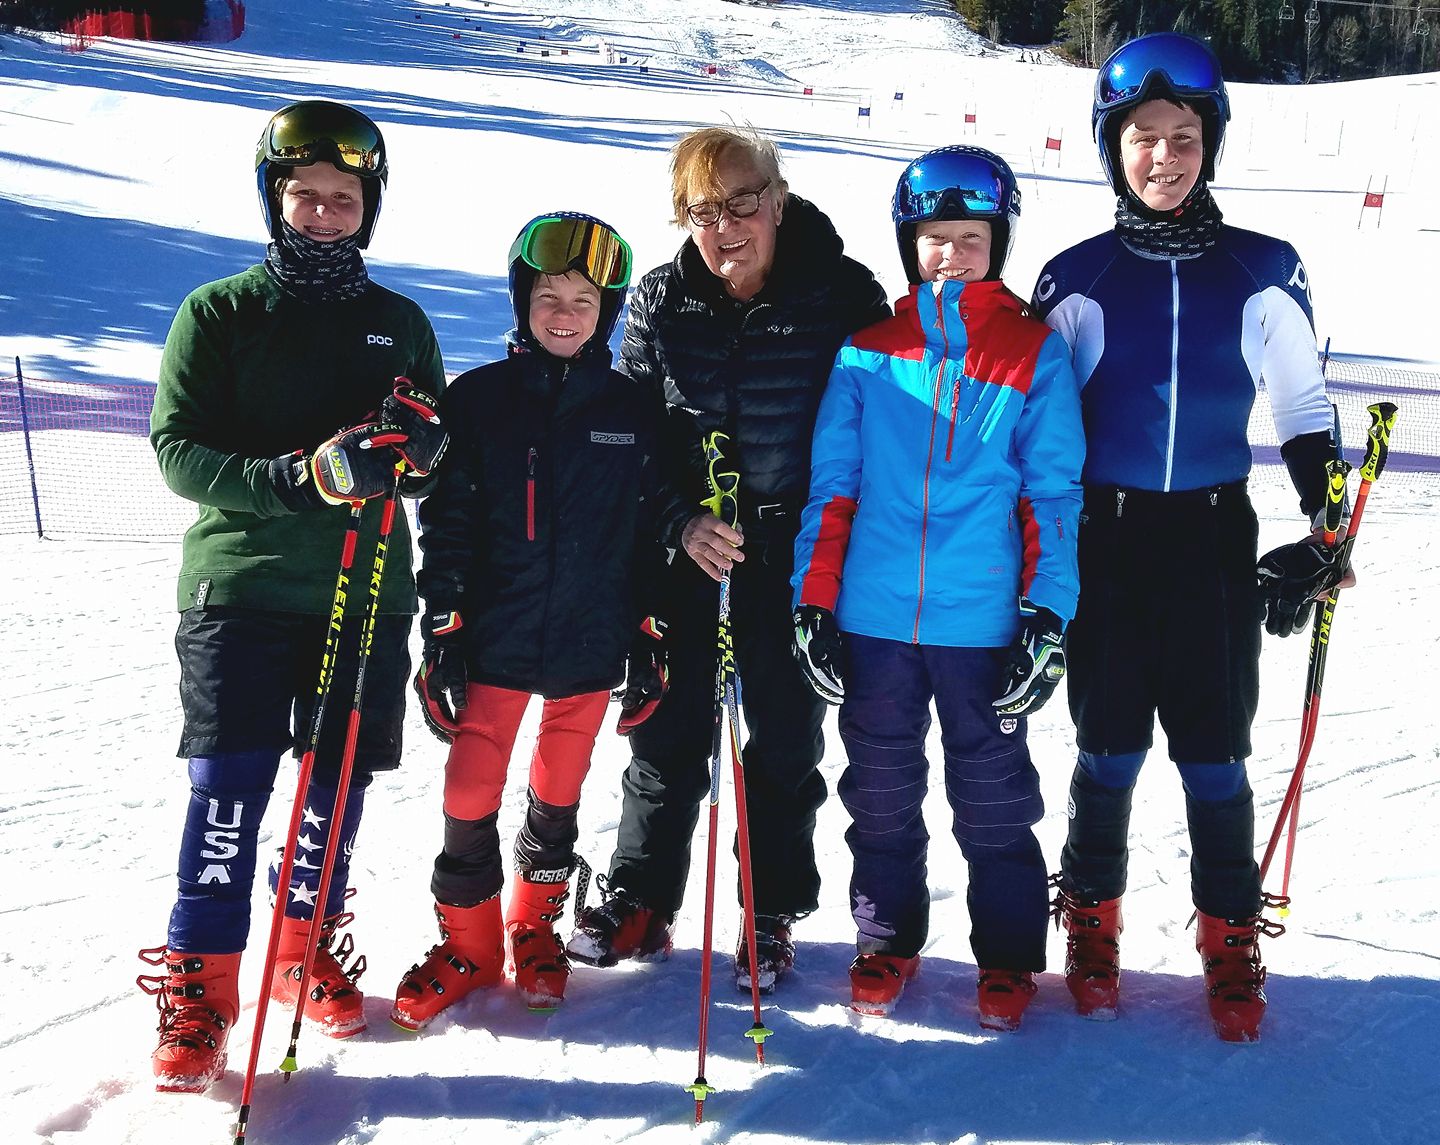 The Sheppard children with coach Erich Sailer at thanksgiving Camp in Winter Park, Colorado.